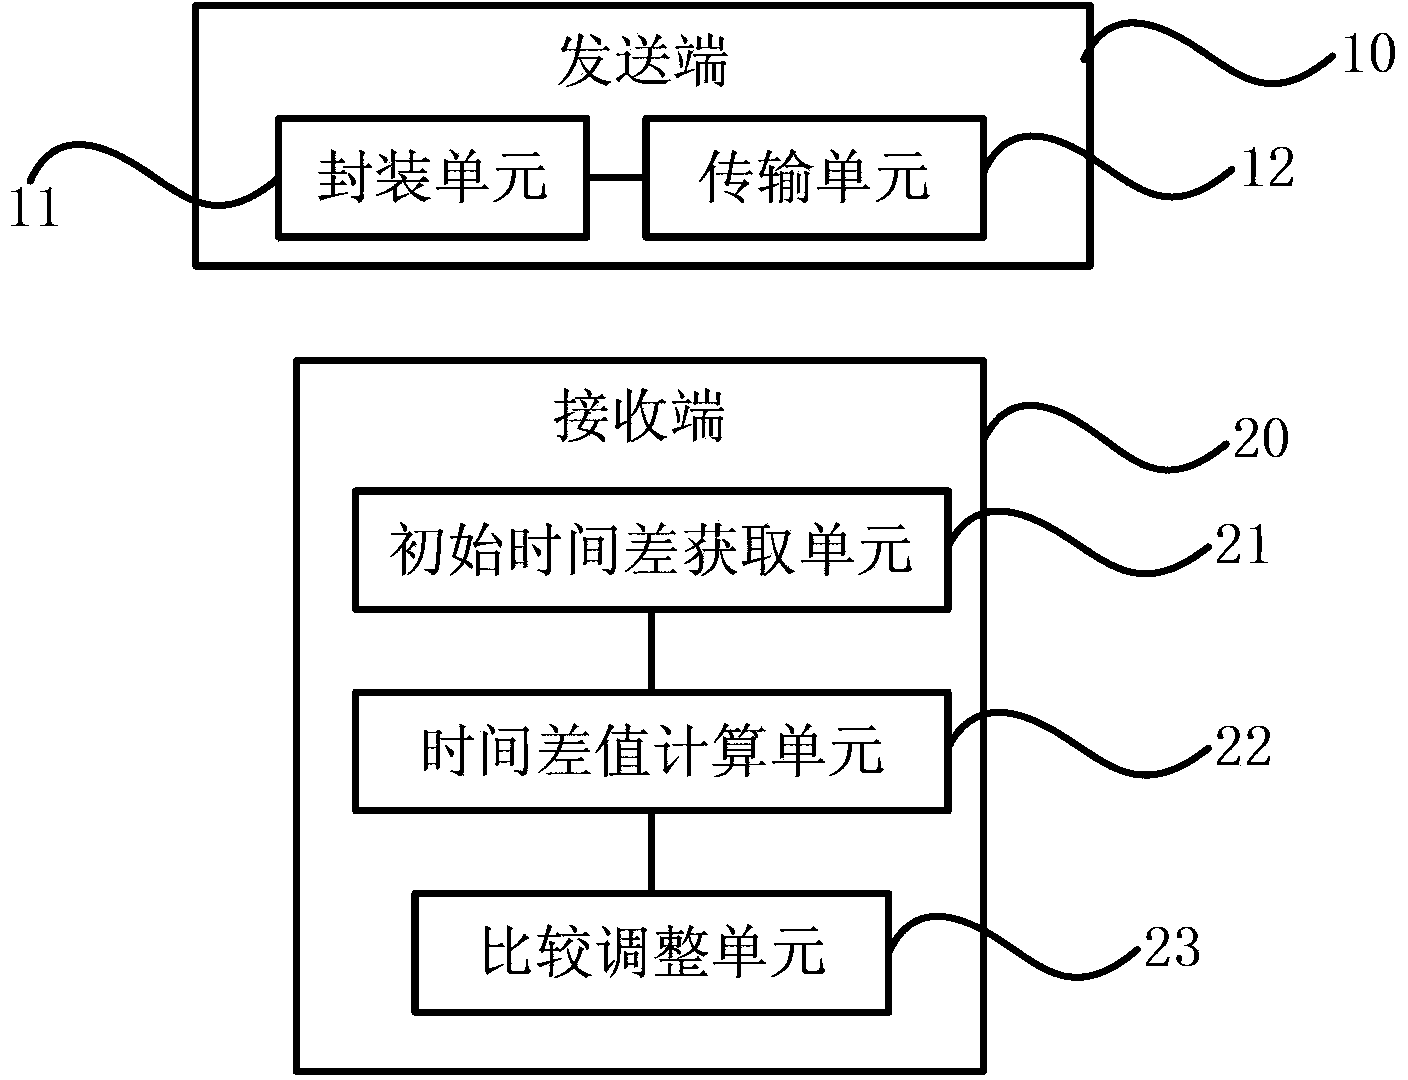 Real-time data transmission method and system based on transmission control protocol